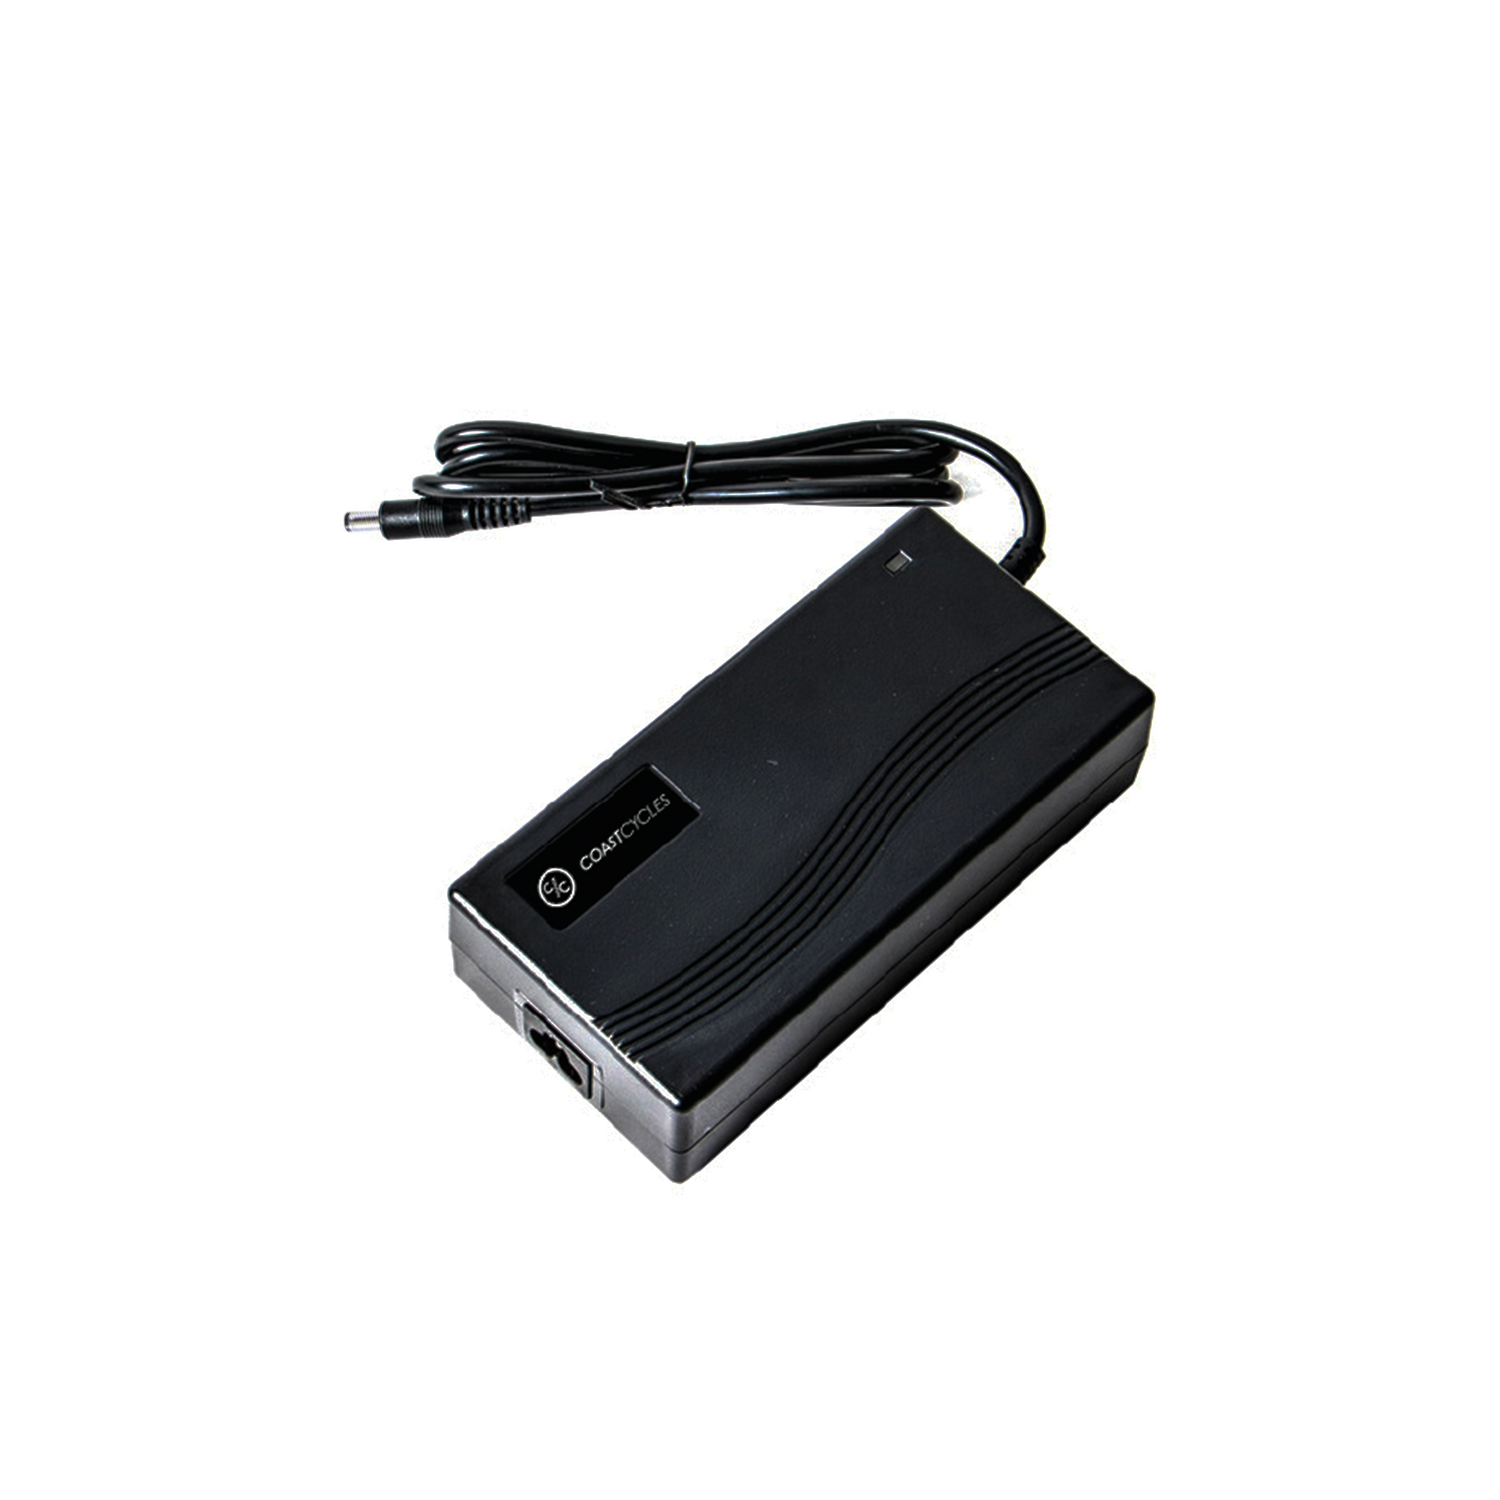 BATTERY CHARGER 48V 2A